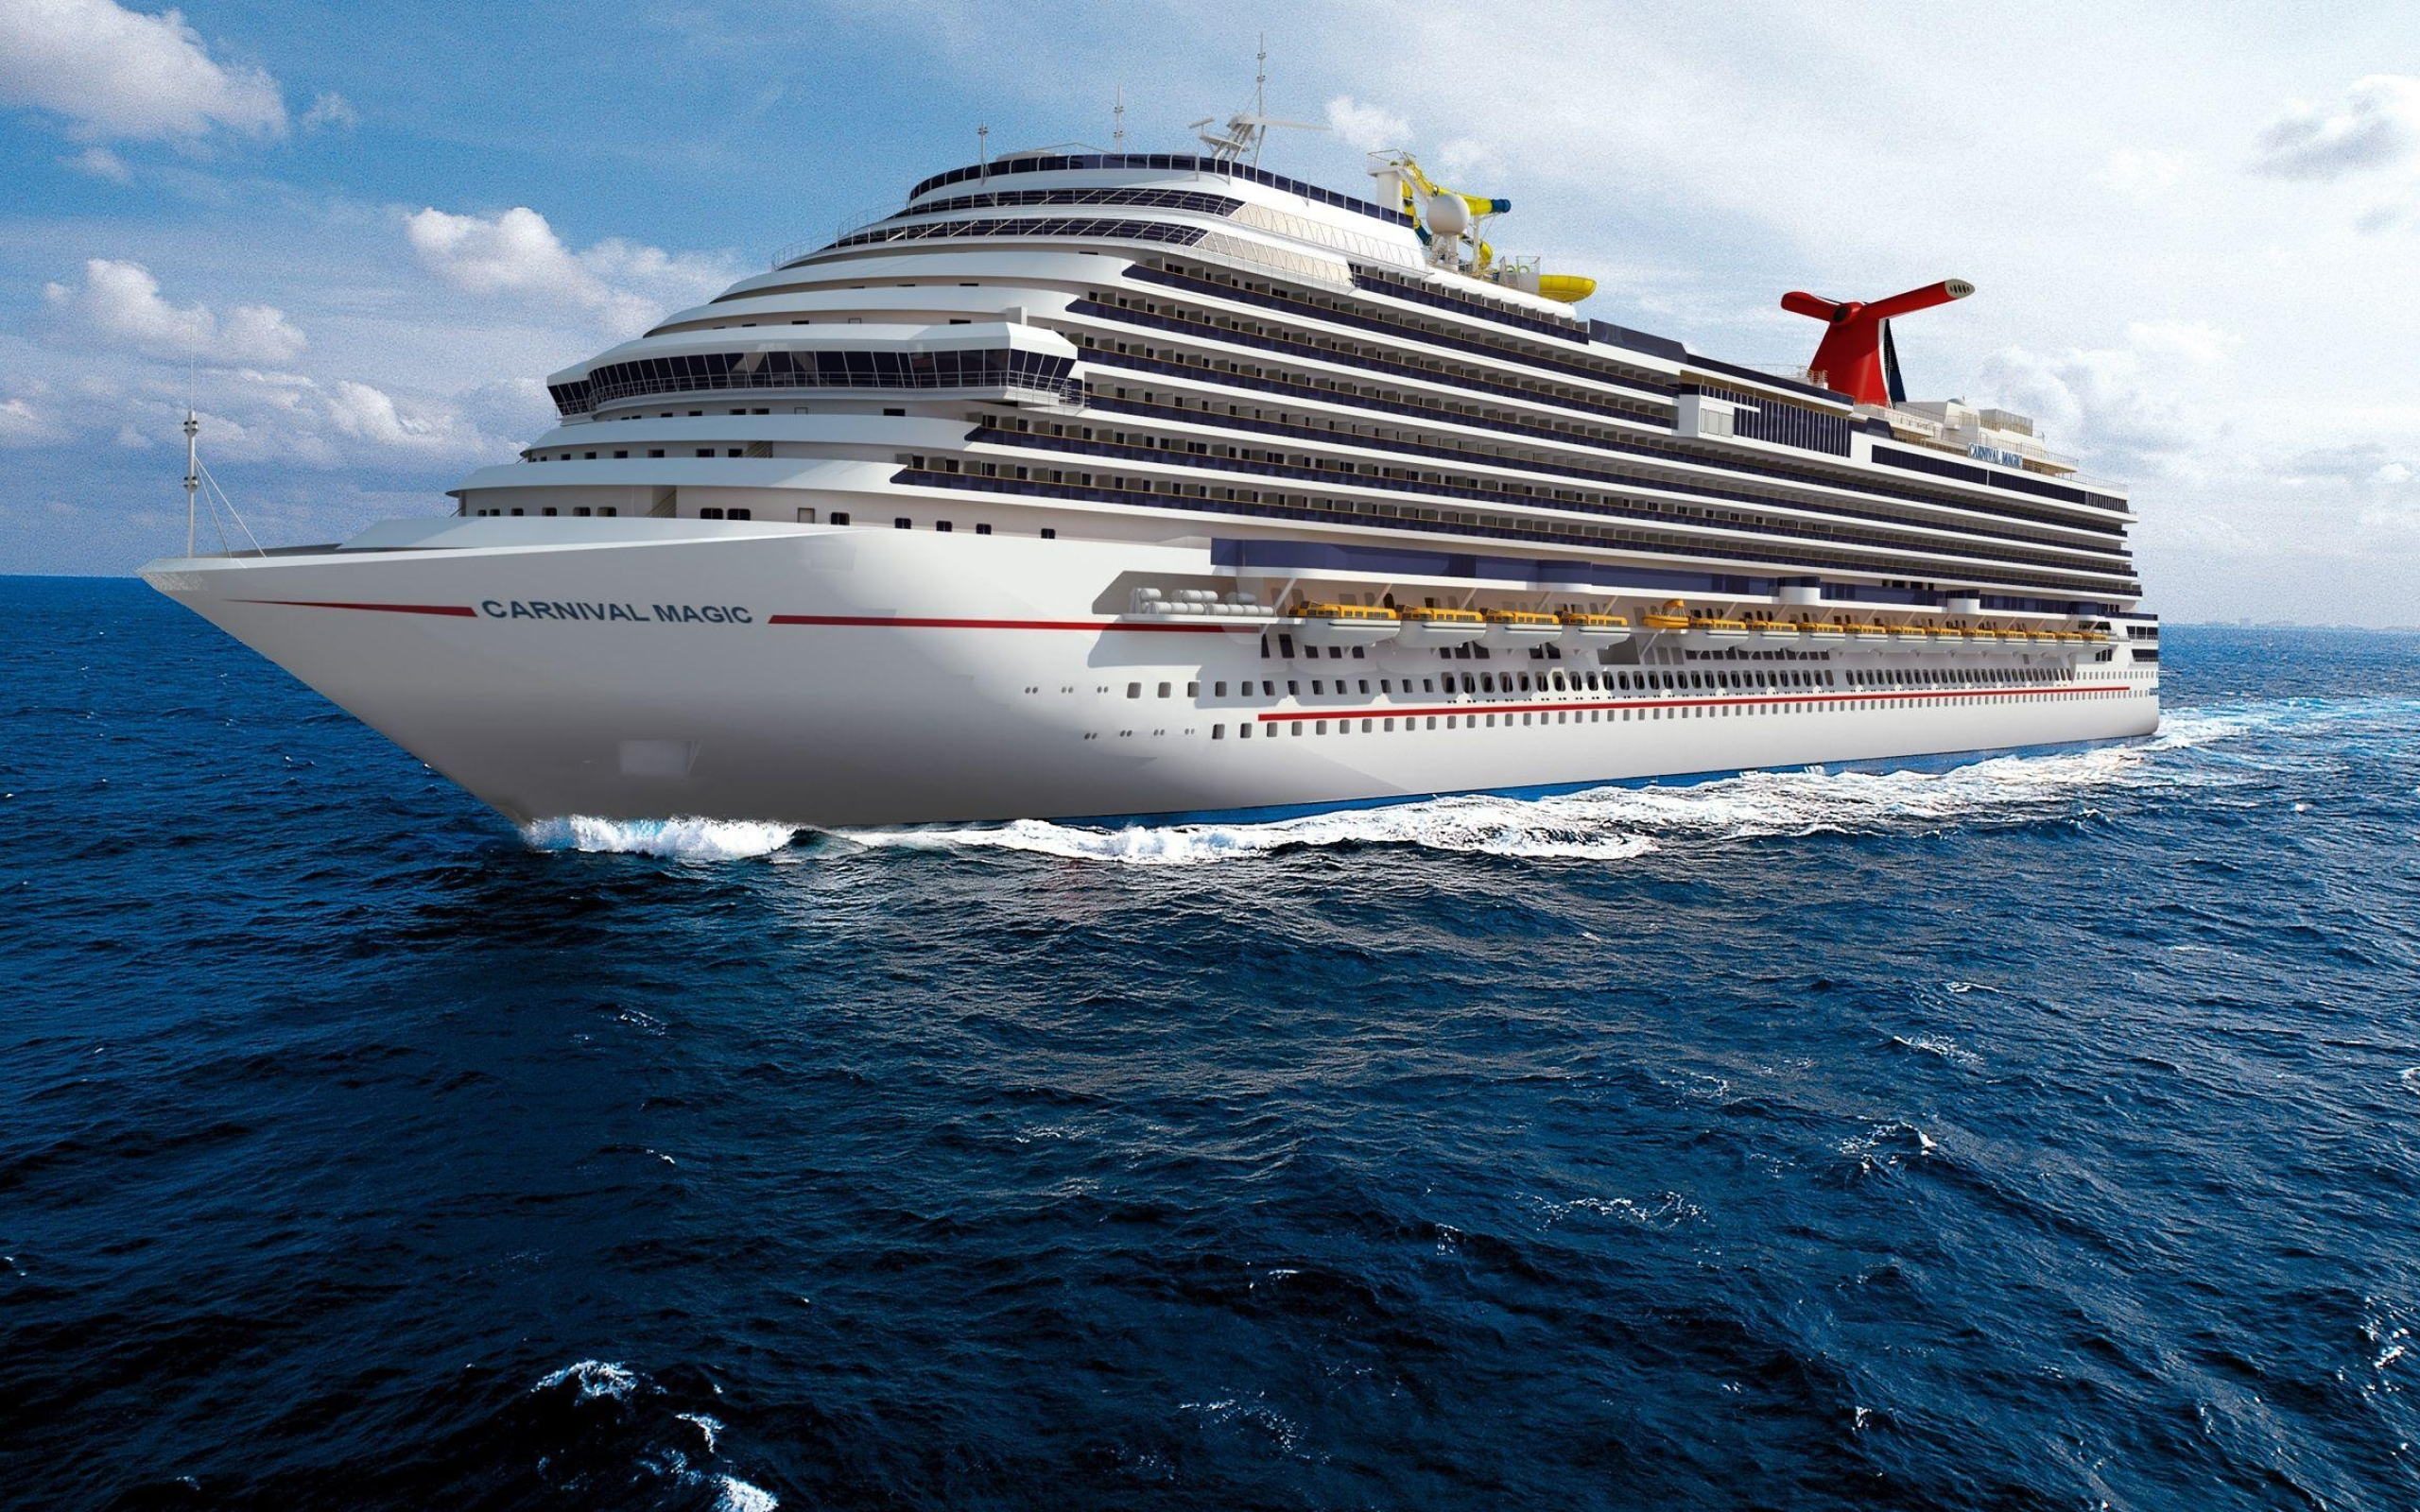 Cruiser (Ship): Carnival Magic, A Dream-class cruise liner, Entered service on 1 May 2011. 2560x1600 HD Background.